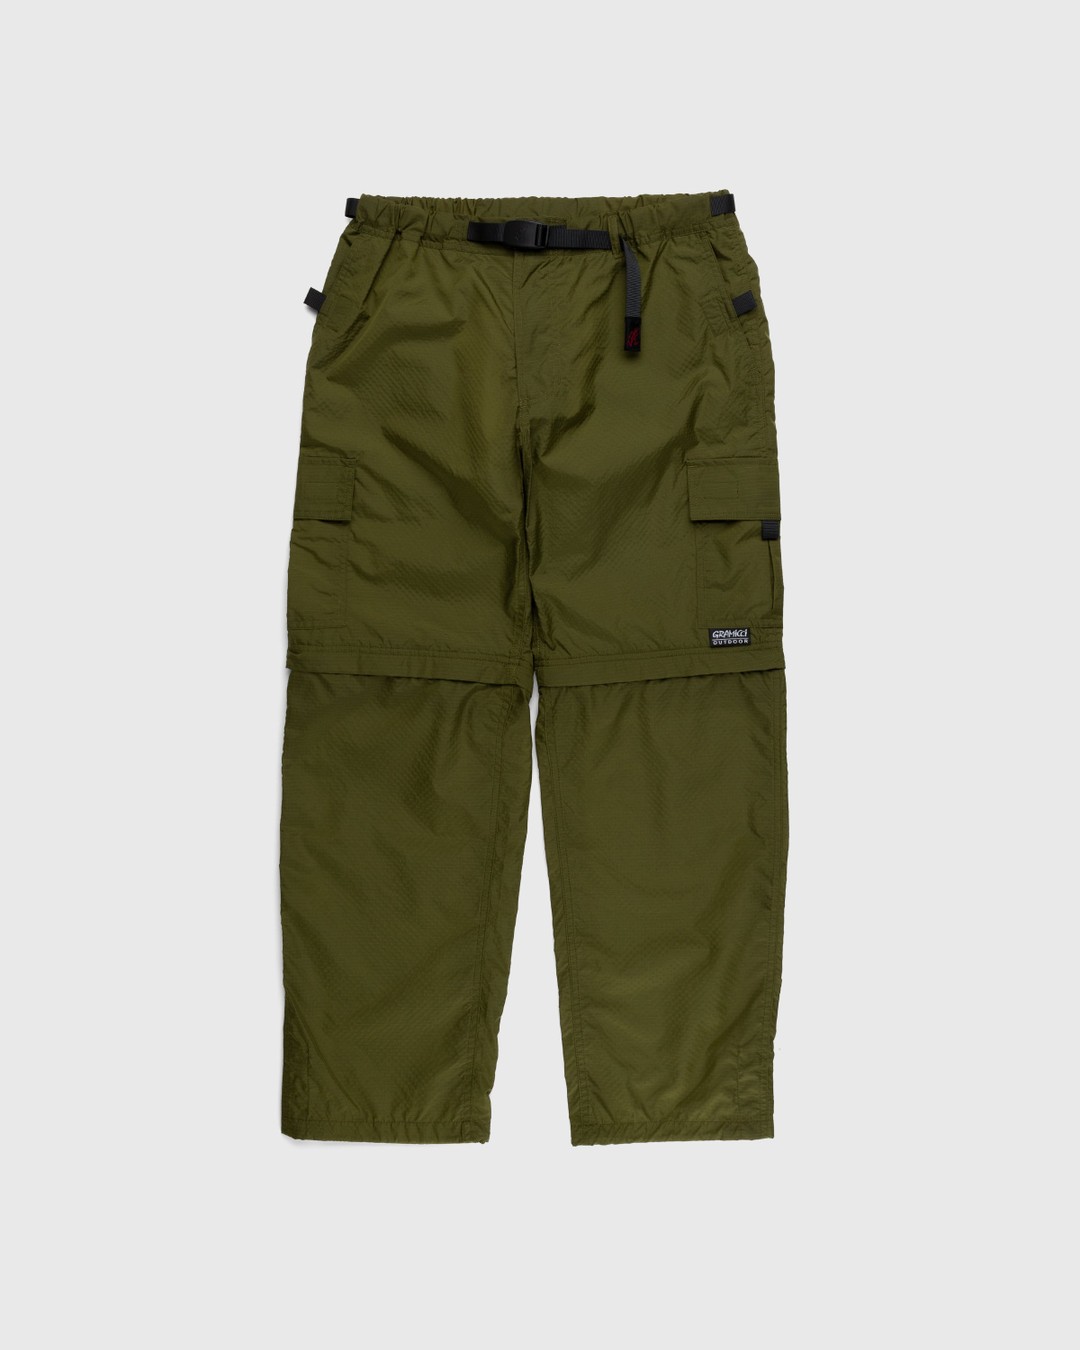 Gramicci – Utility Zip-Off Cargo Pant Army Green - Pants - Green - Image 2